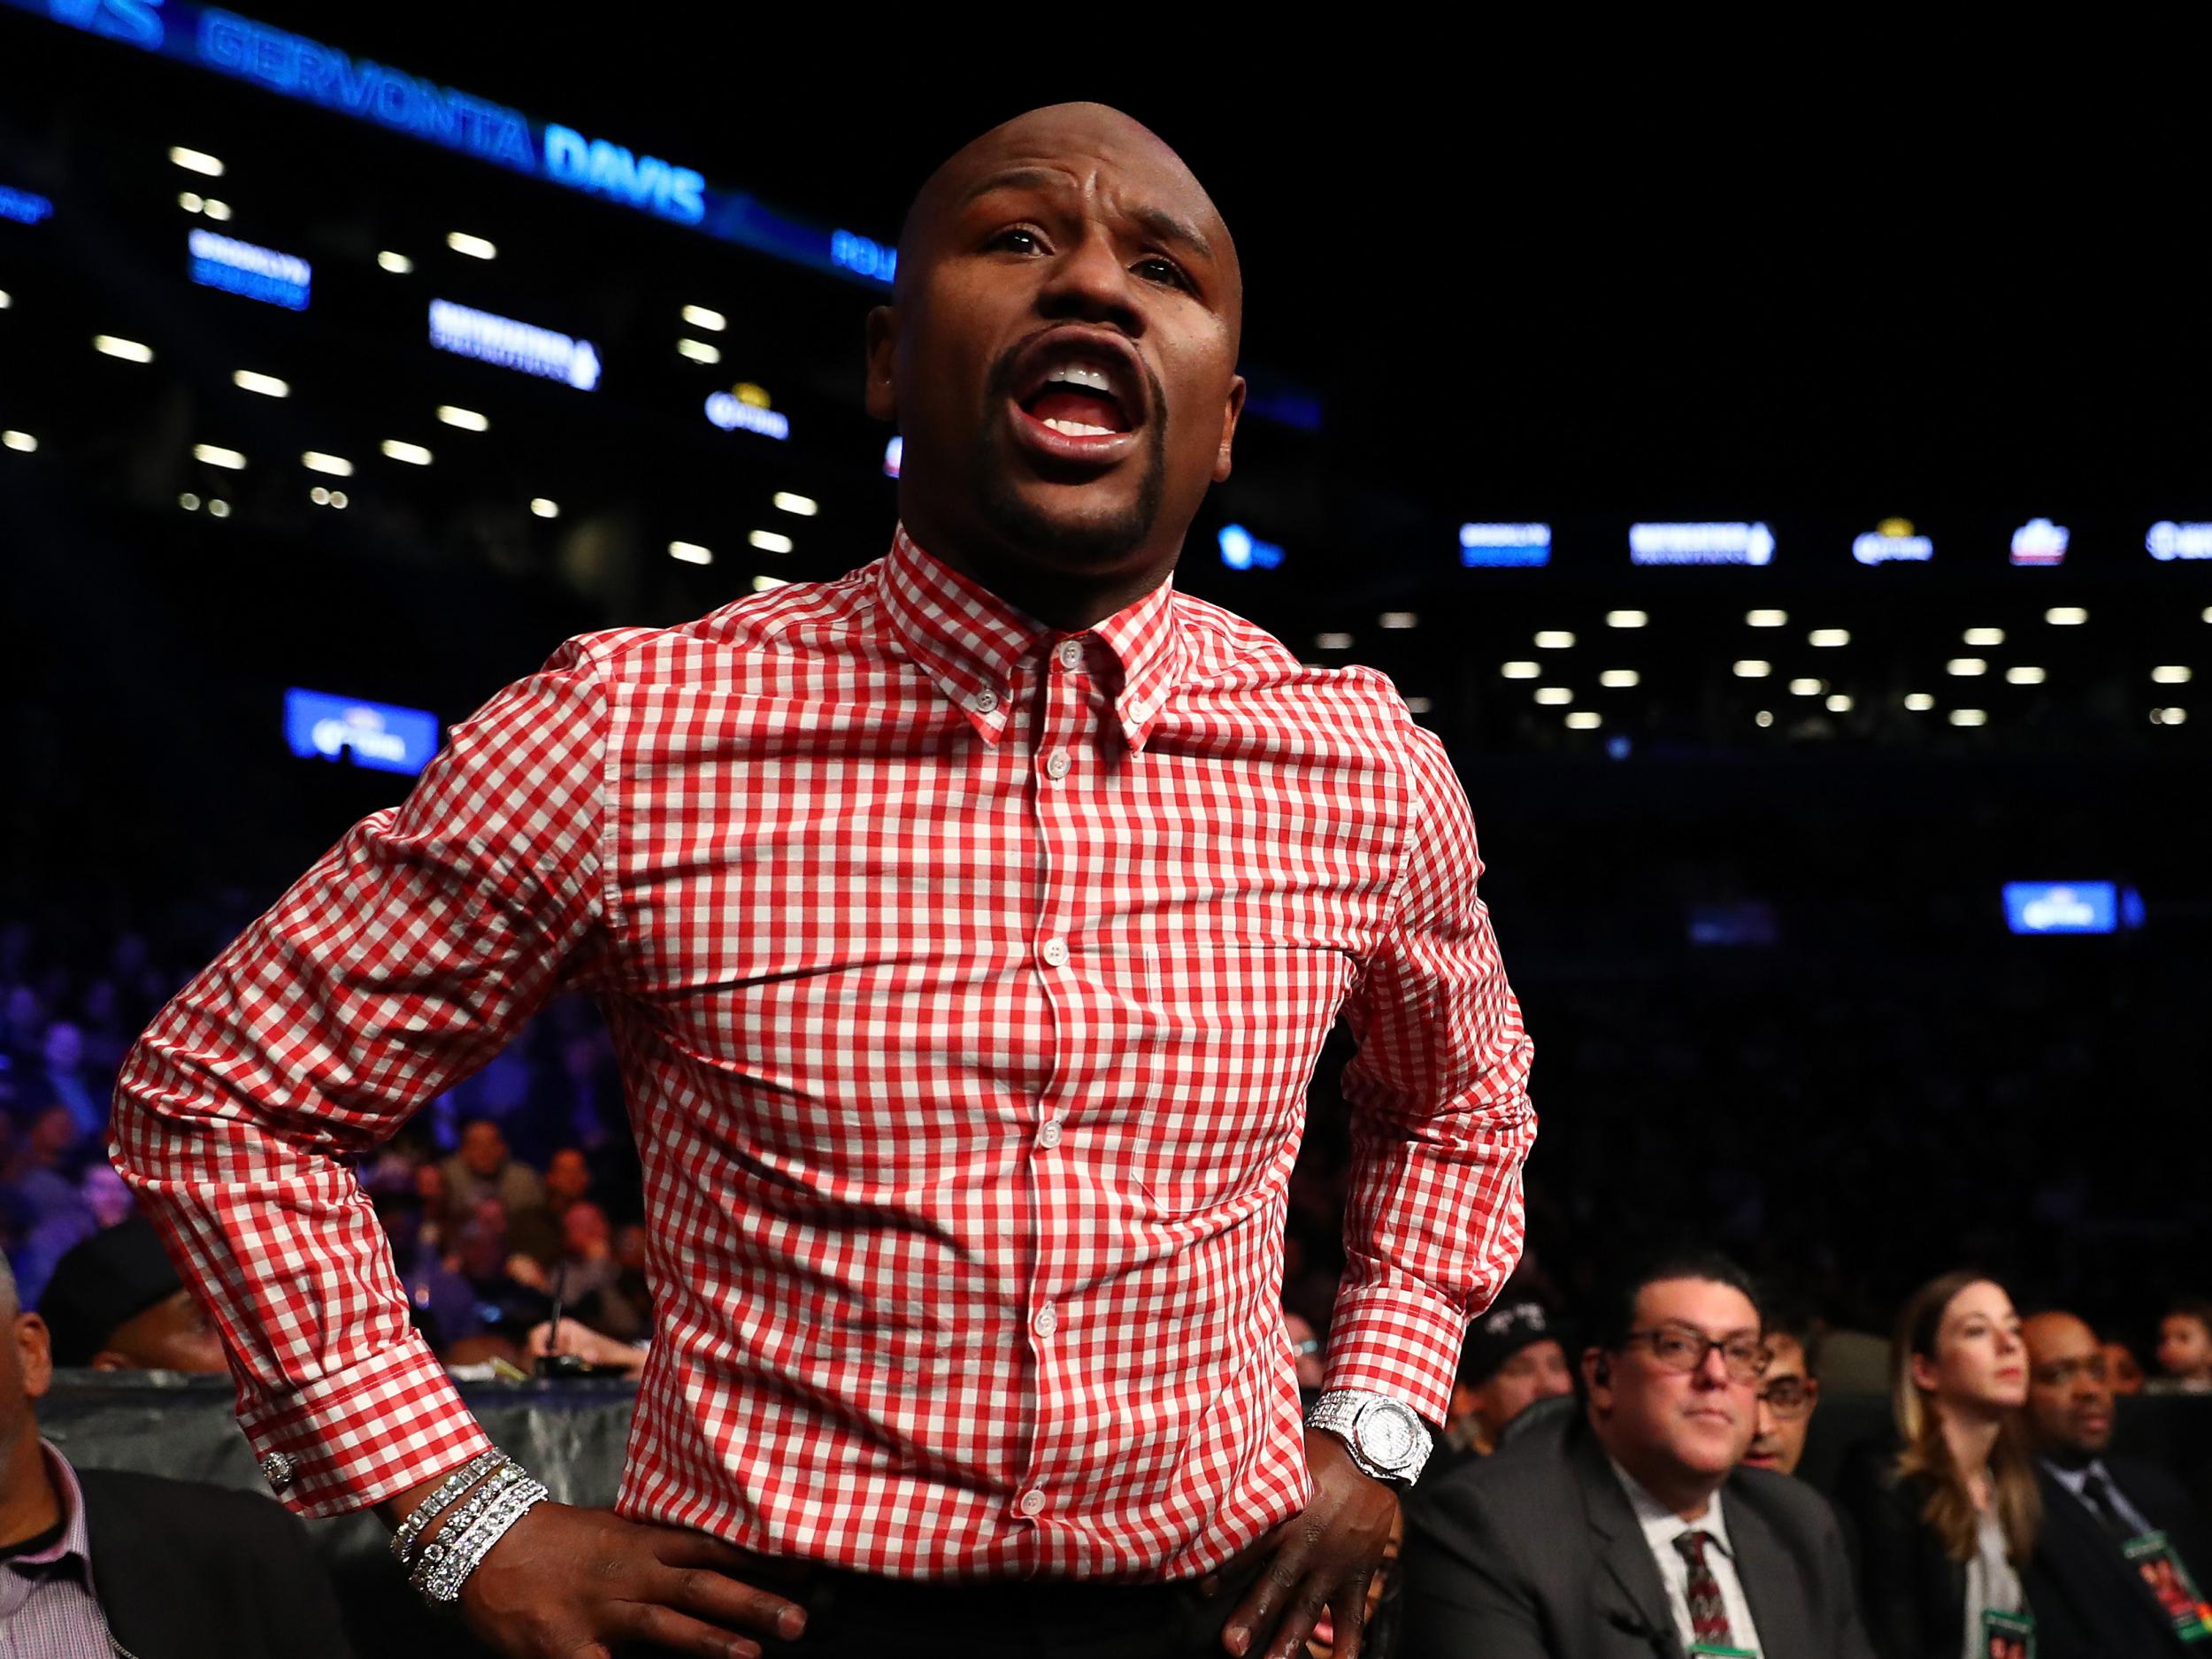 Mayweather has turned to promoting and managing after his ring career ended